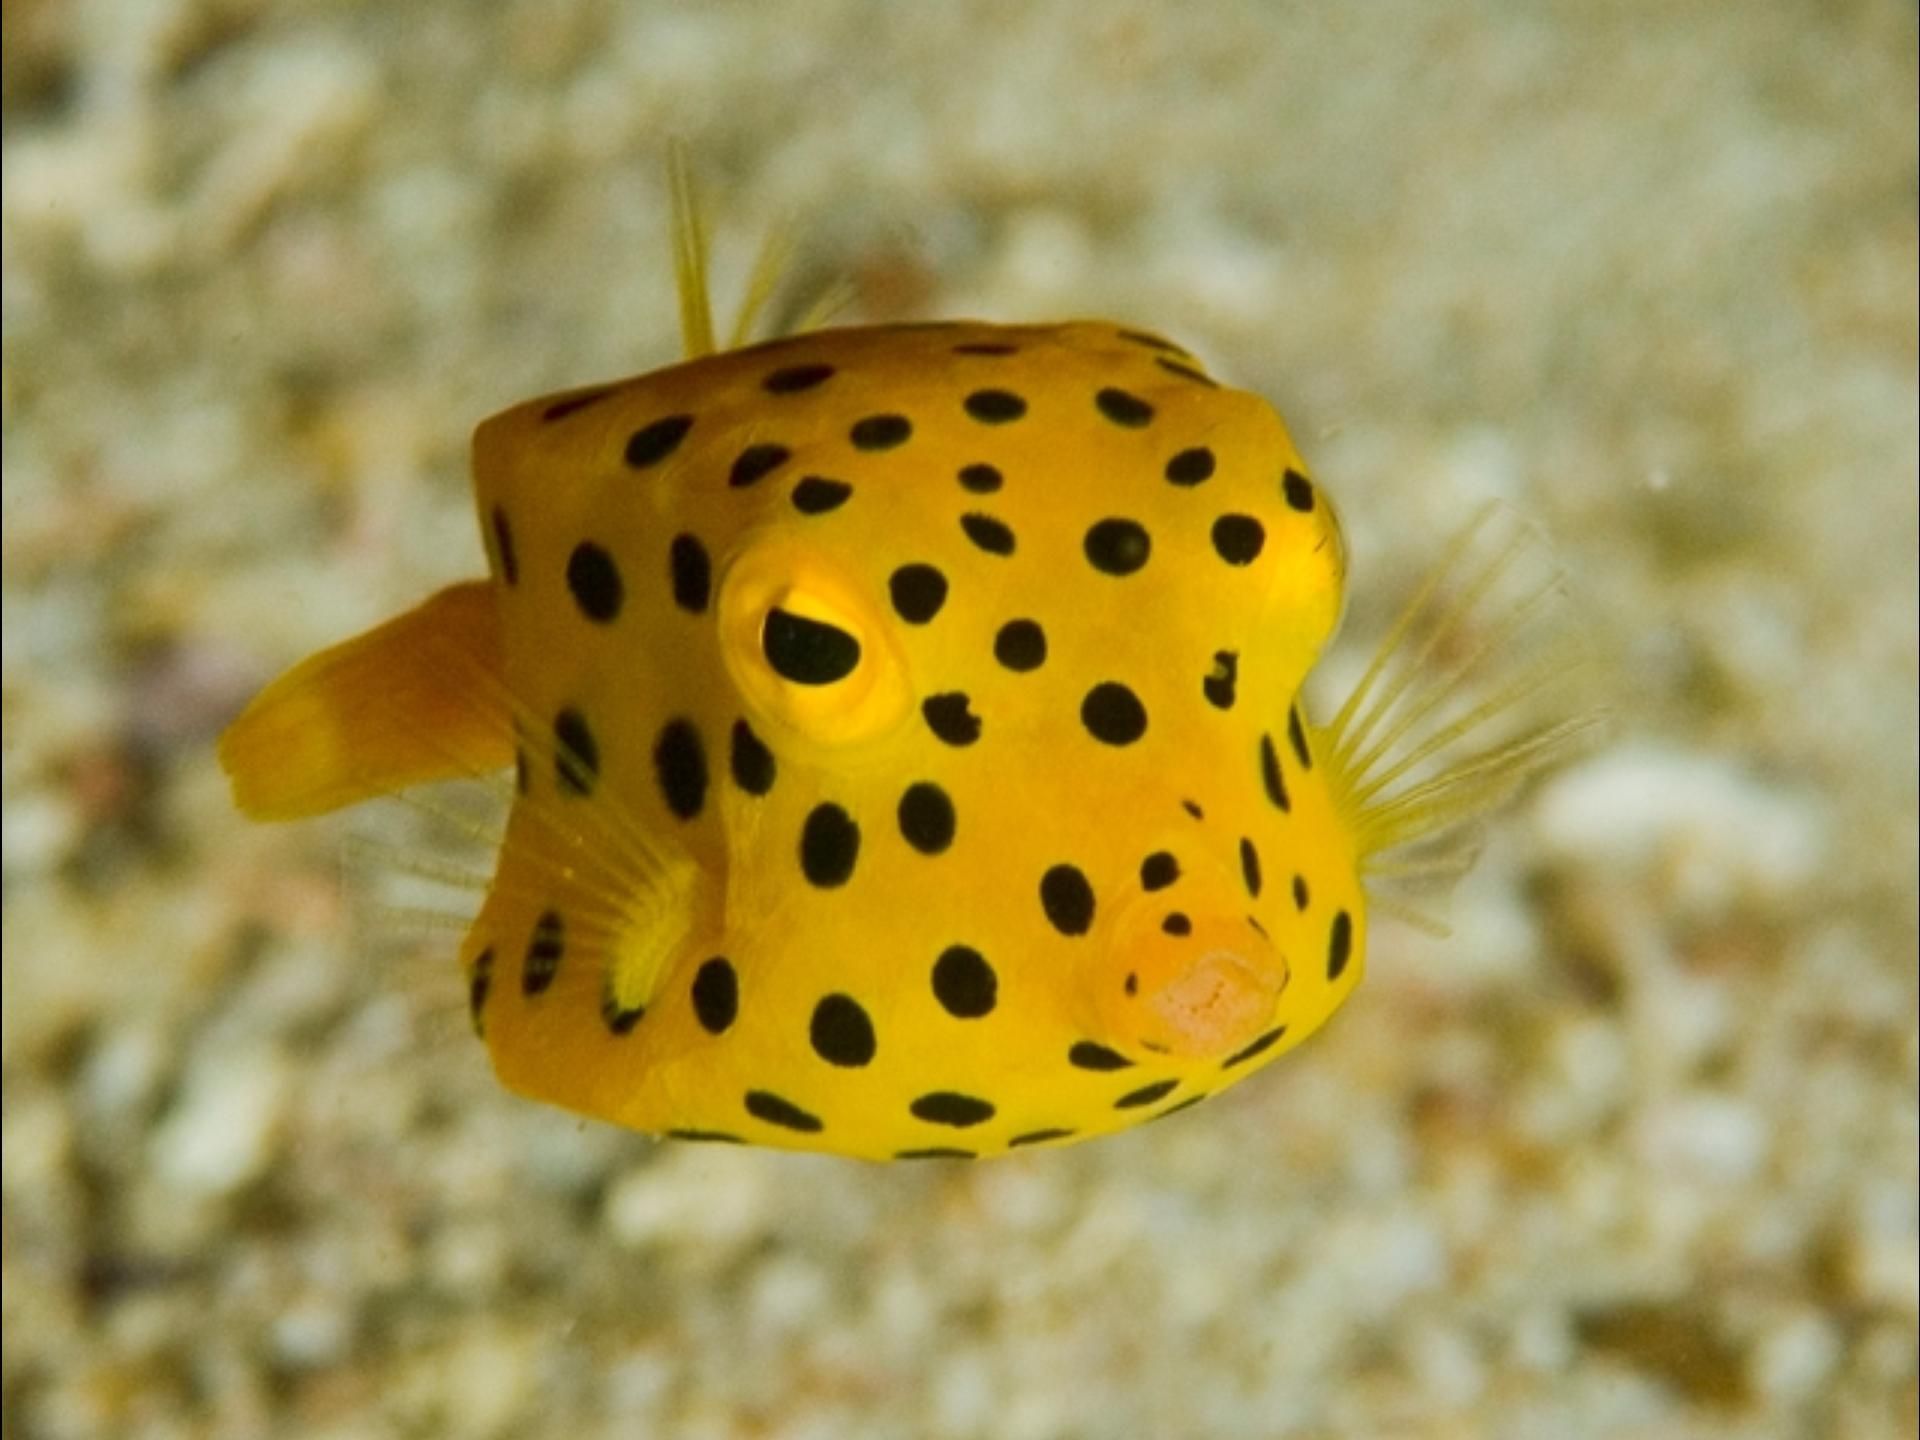 The cube-shaped boxfish is just as cute as it is strange. Most species of these small saltwater fish rarely grow larger than a few inches, making them favorites for private aquarium collections. You